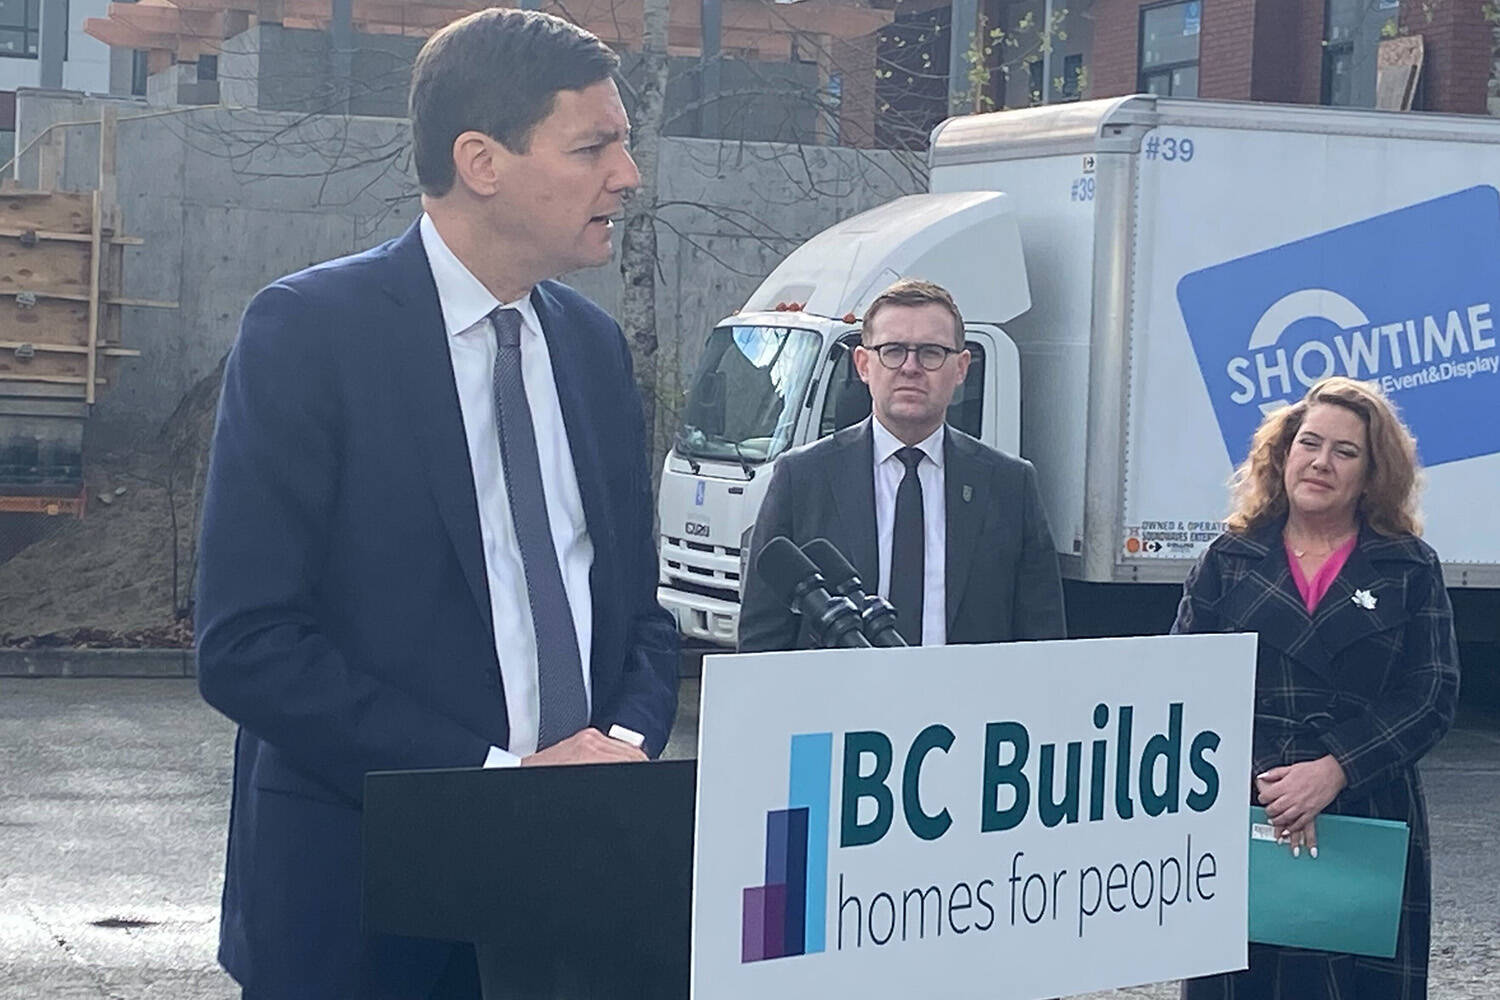 Premier David Eby says Friday’s announcement that B.C. is seeking changes to decriminalization tries to balance the interests of people using substances and public safety. The move has earned praise from UBCM, but also criticism from others. (Matthew Claxton/Langley Advance-Times)